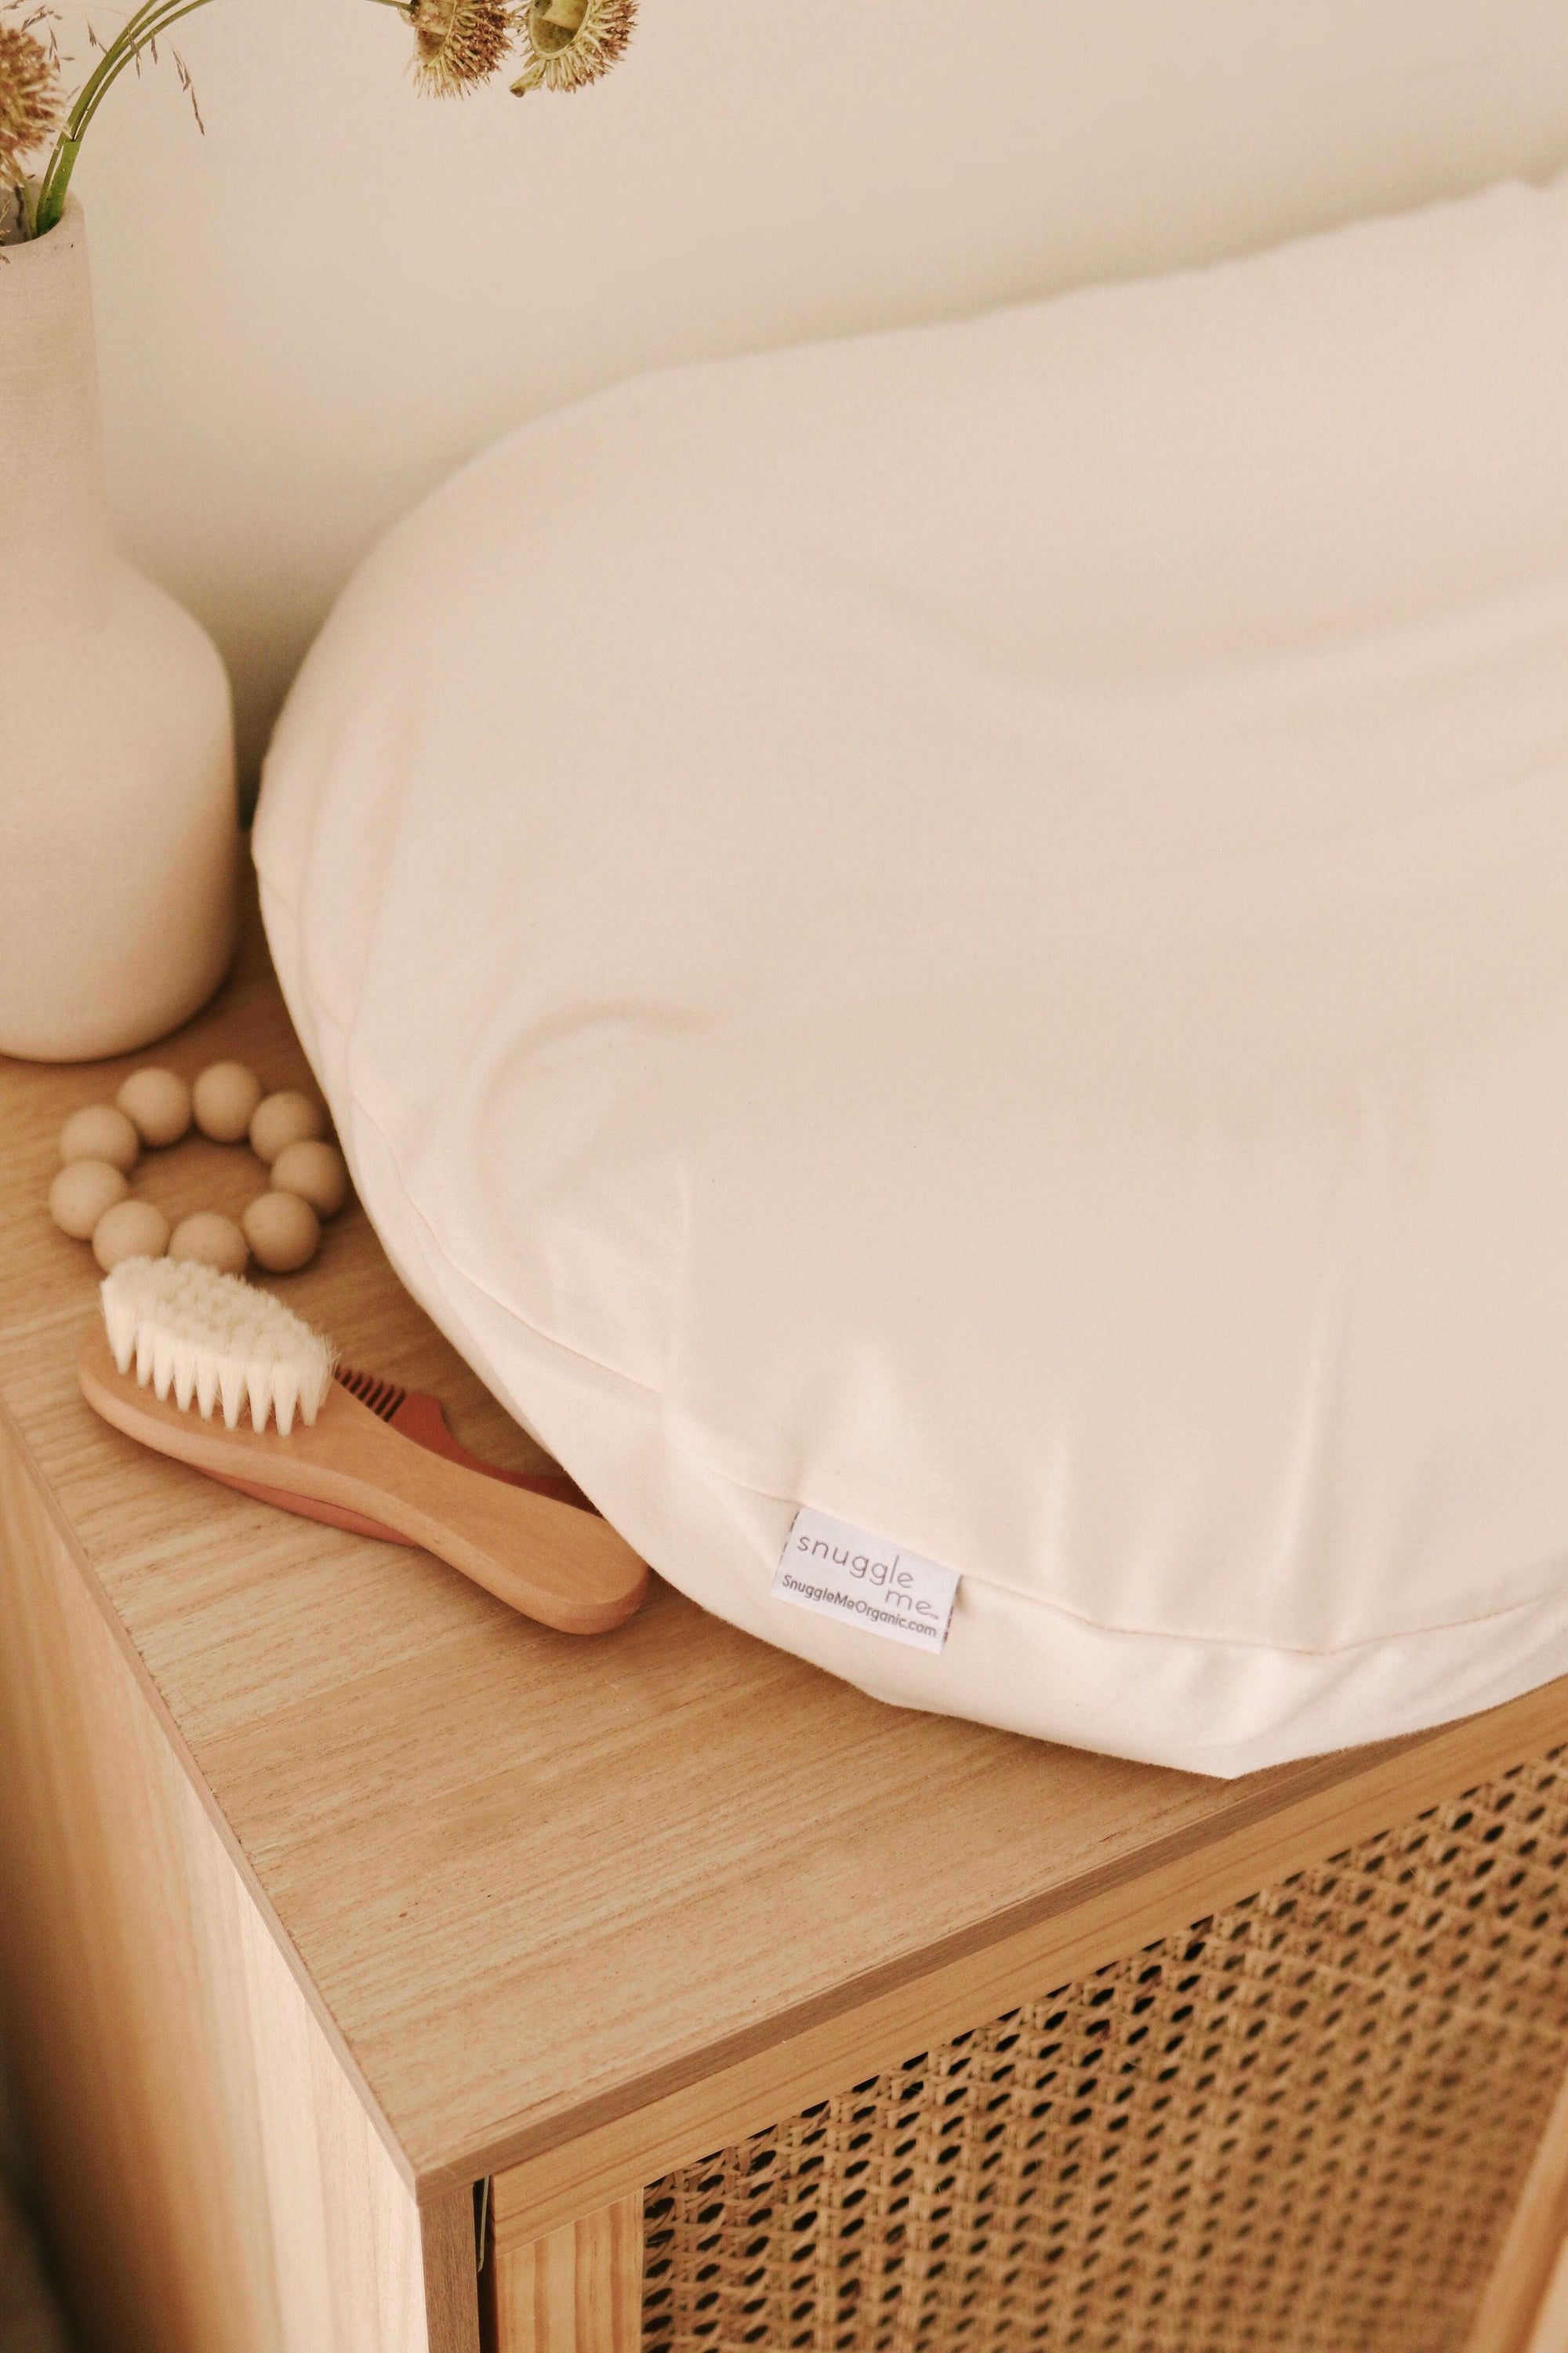 A Snuggle Me Lounger Cover in Natural with a baby changing pad on it. The product is sturdy and made of high-quality wood, providing a reliable and stylish storage solution for your baby's essentials. The spacious drawers